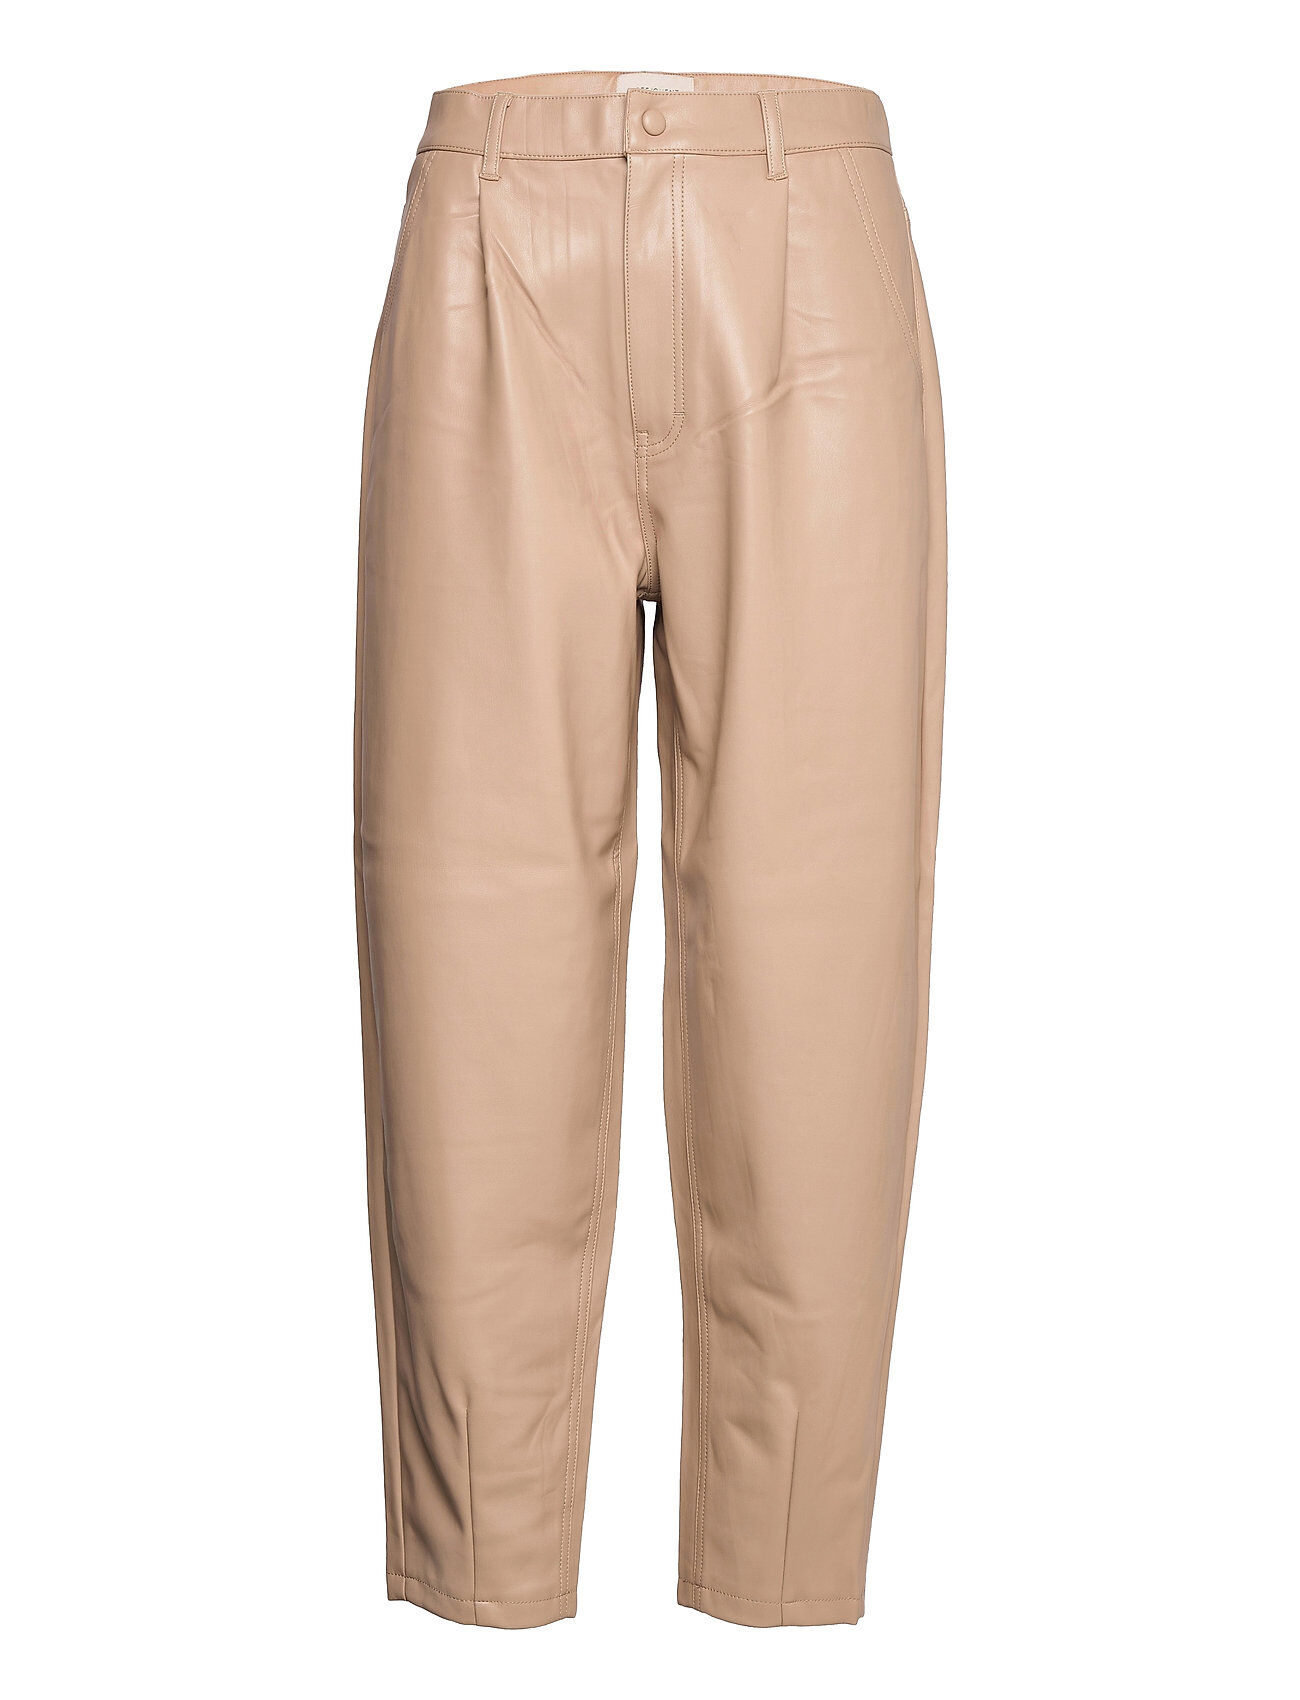 FREE/QUENT Fqharley-Pa-Ankle-Bagger Trousers Leather Leggings/Bukser Beige FREE/QUENT